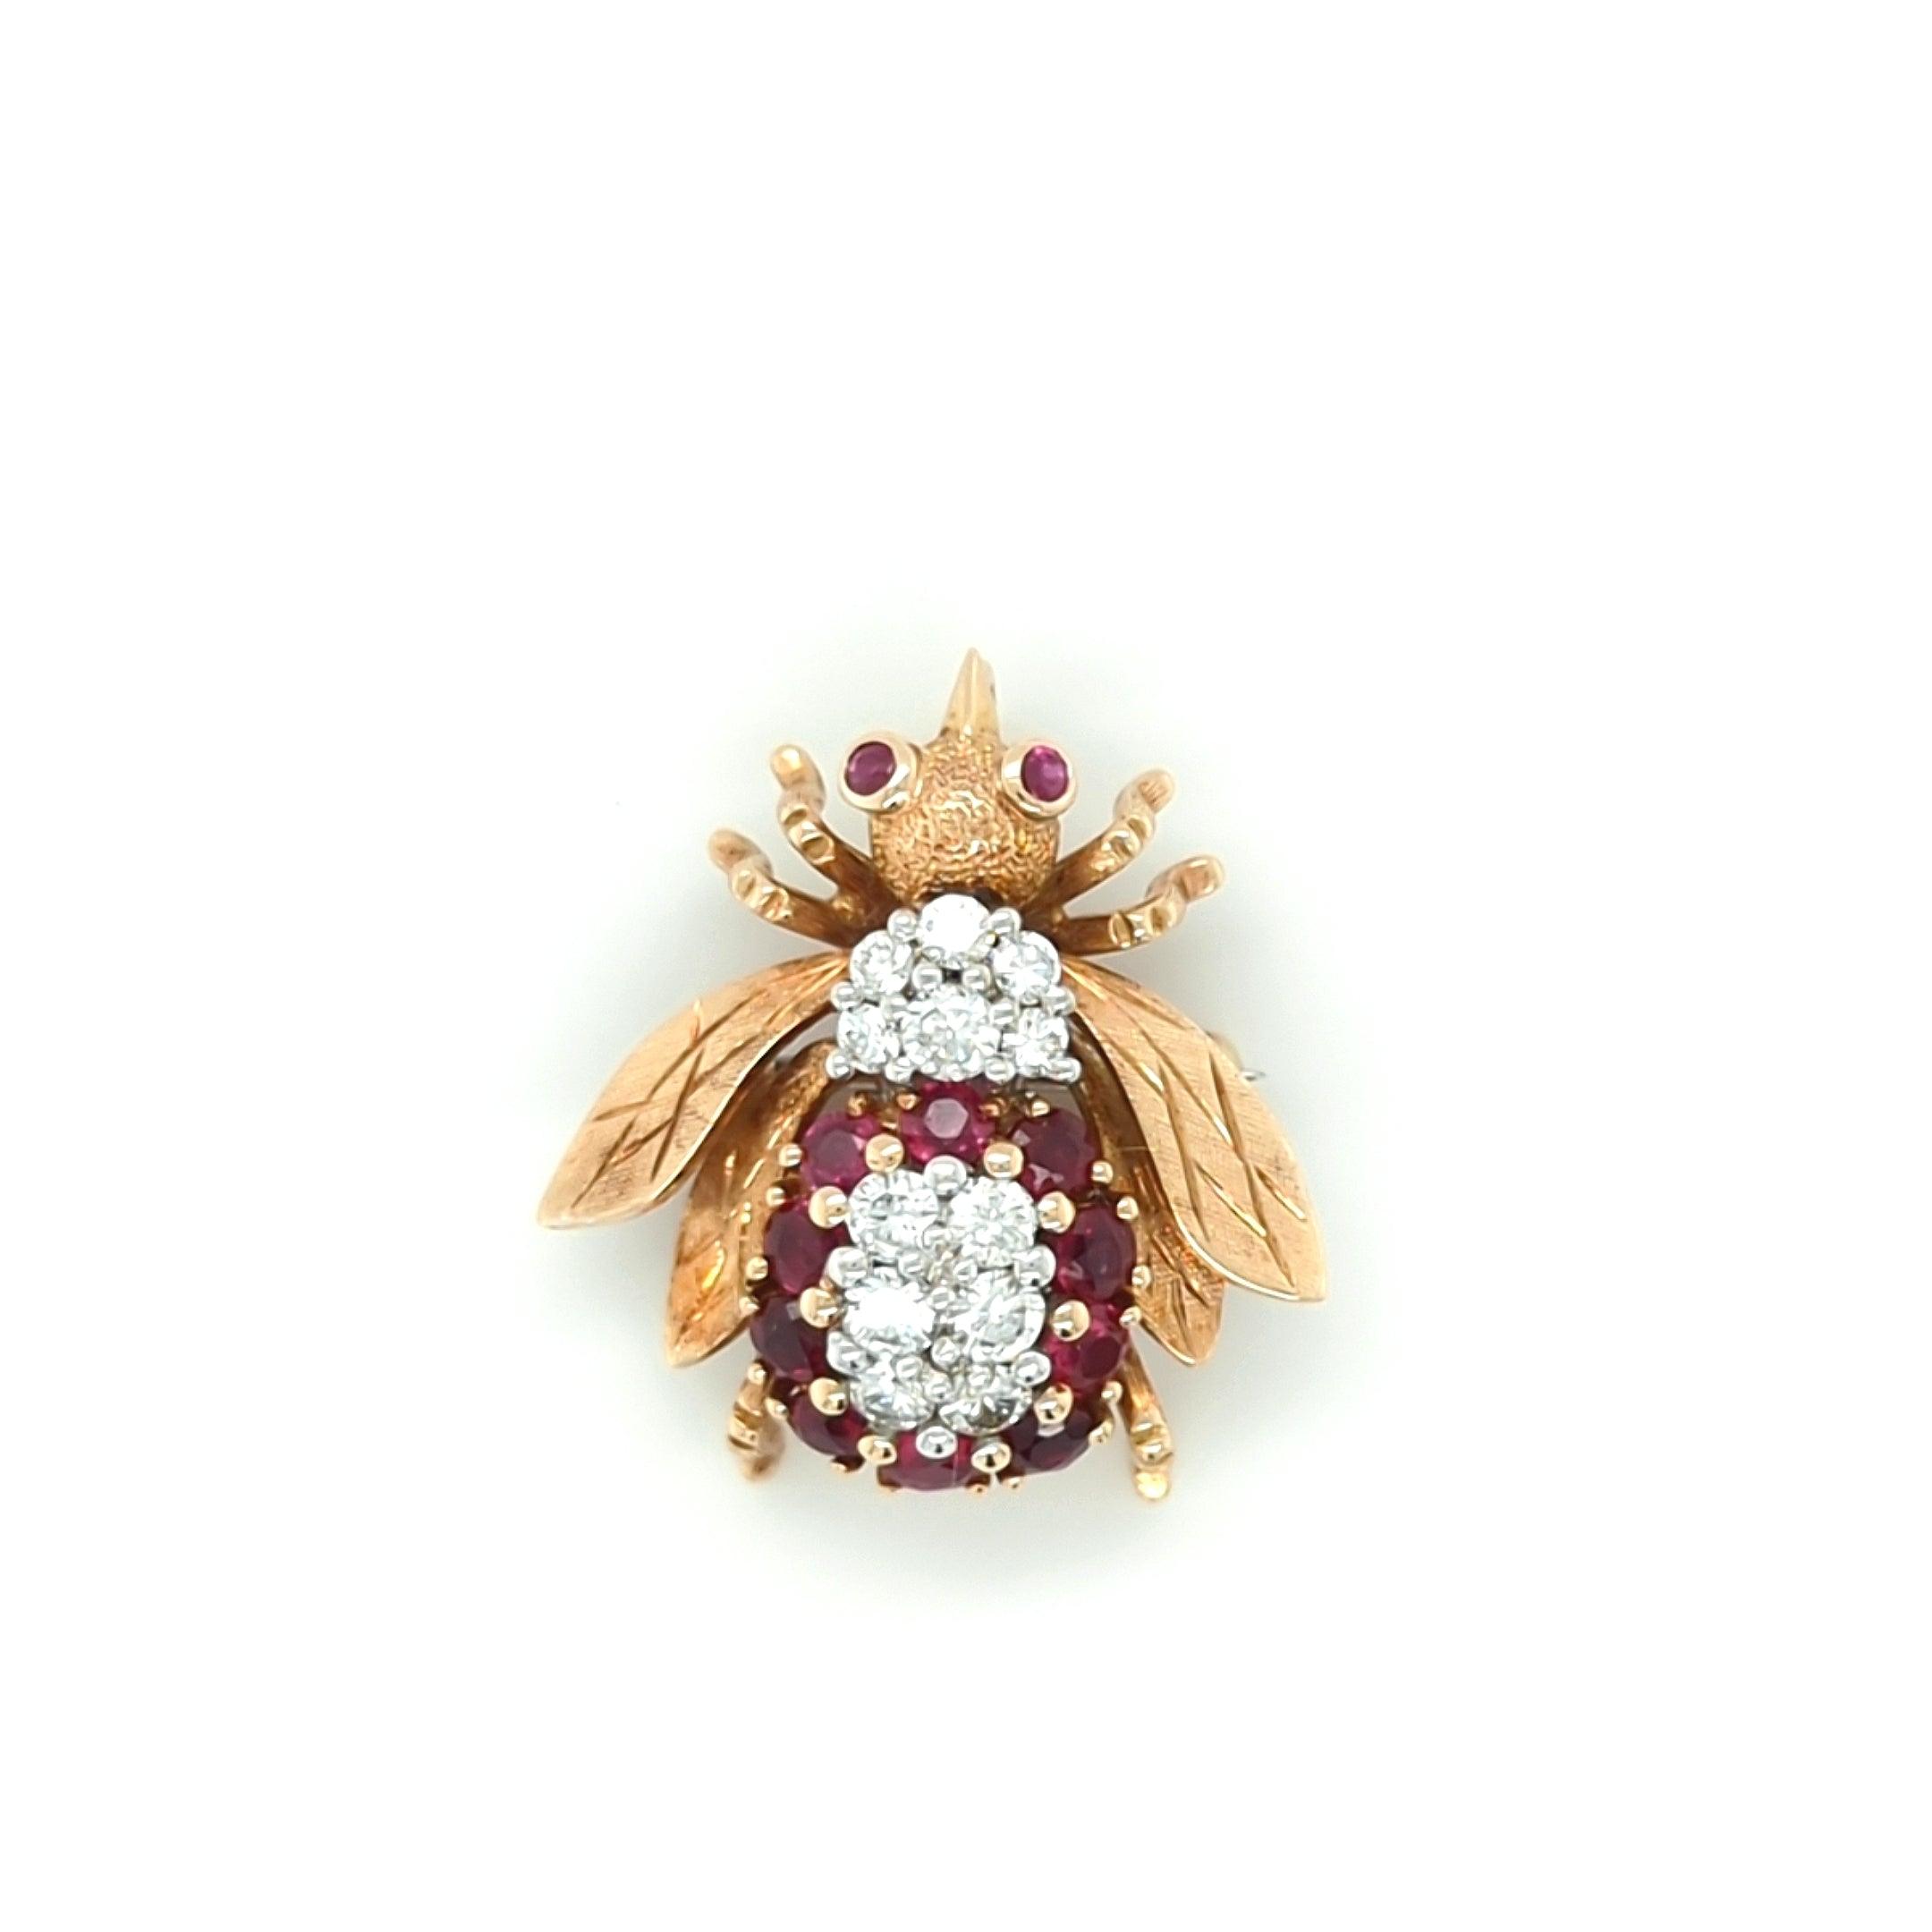 Vintage Ruby and Diamond Bee Brooch in 14kt Yellow Gold by Frank J. Golden - The Rutile Ltd